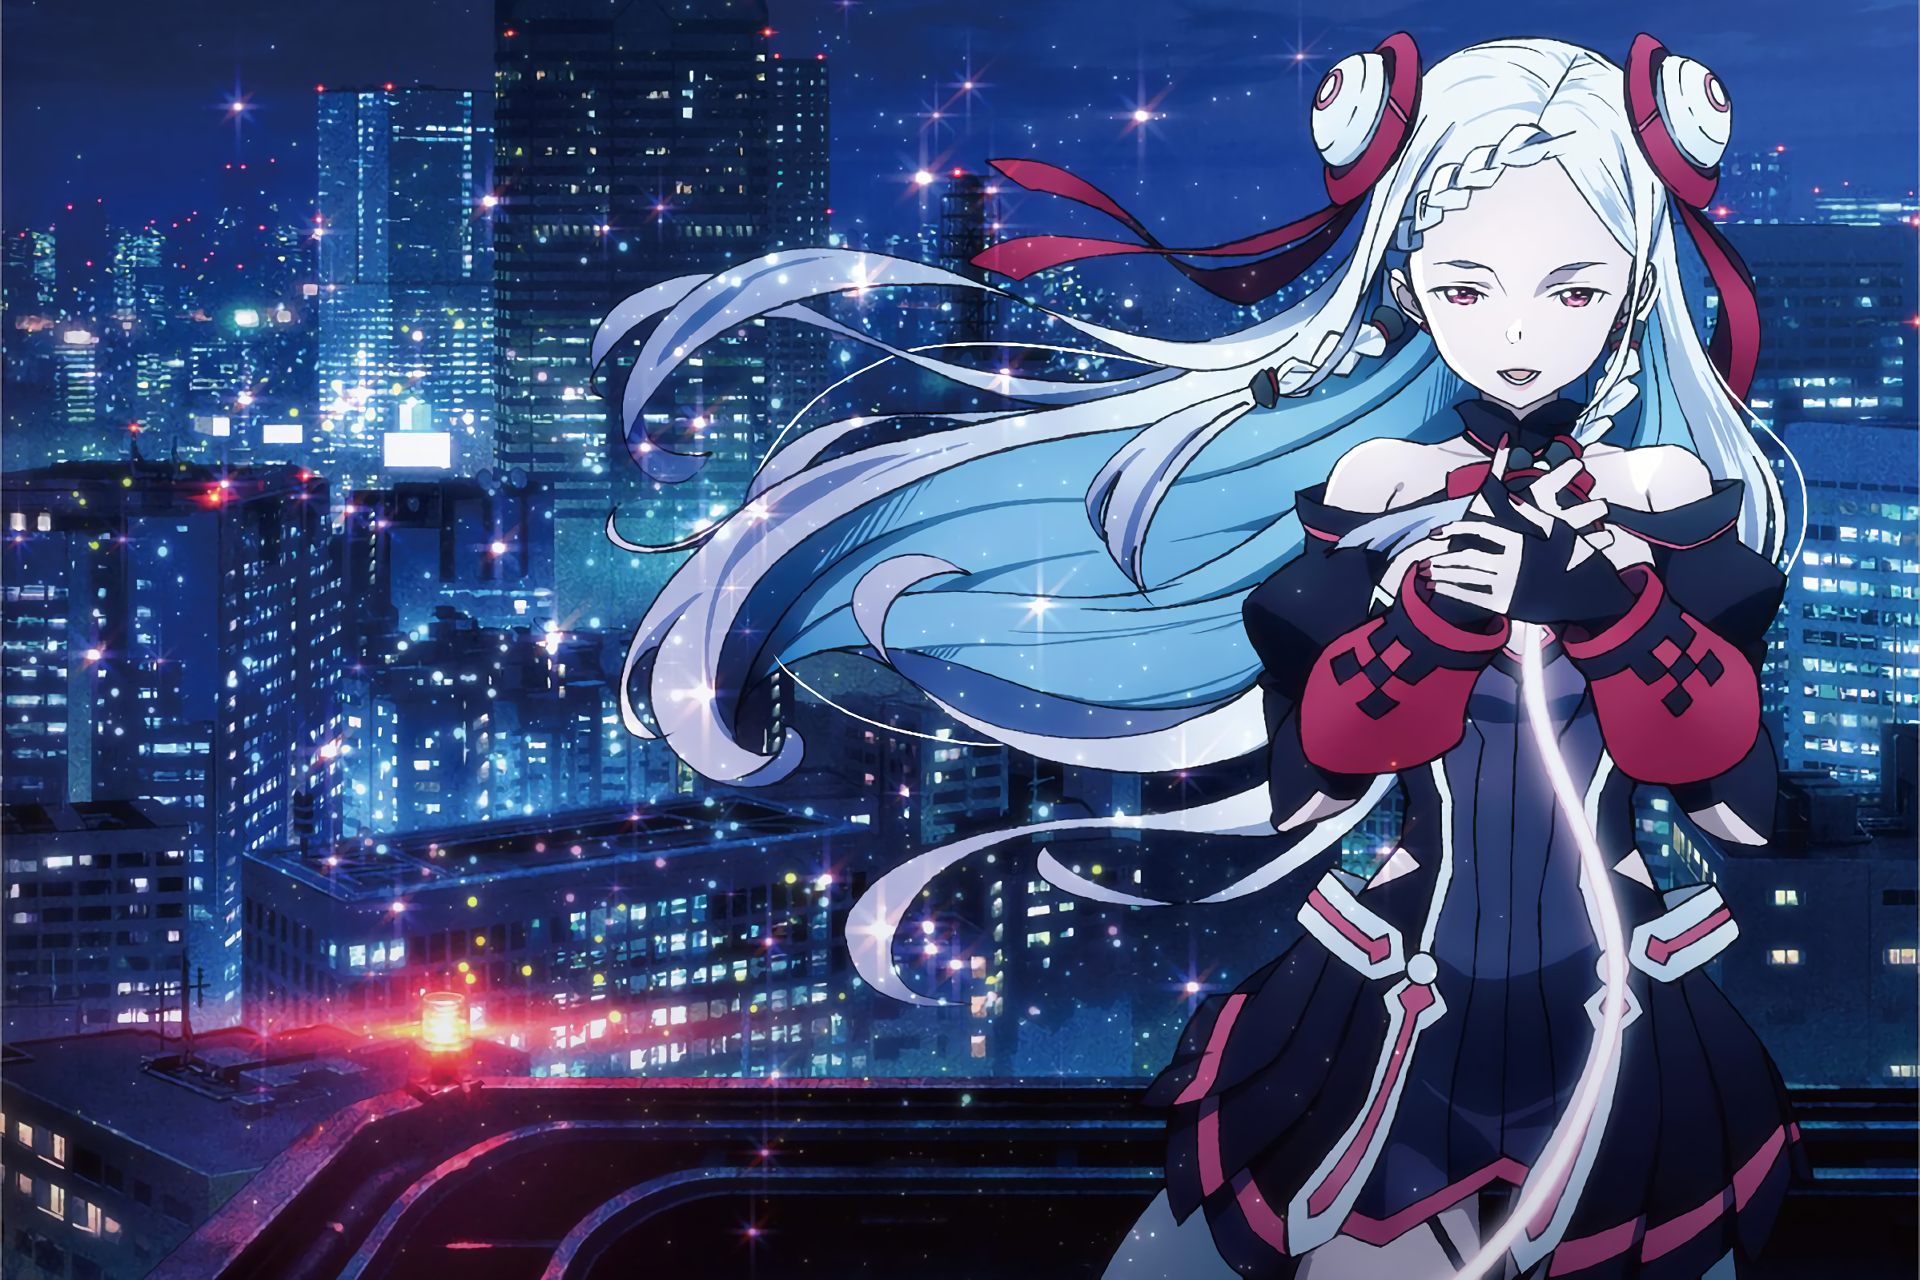 Yuna Sword Art Online Sword Art Online Sword Art Online Ordinal Scale Girl 1920x1280